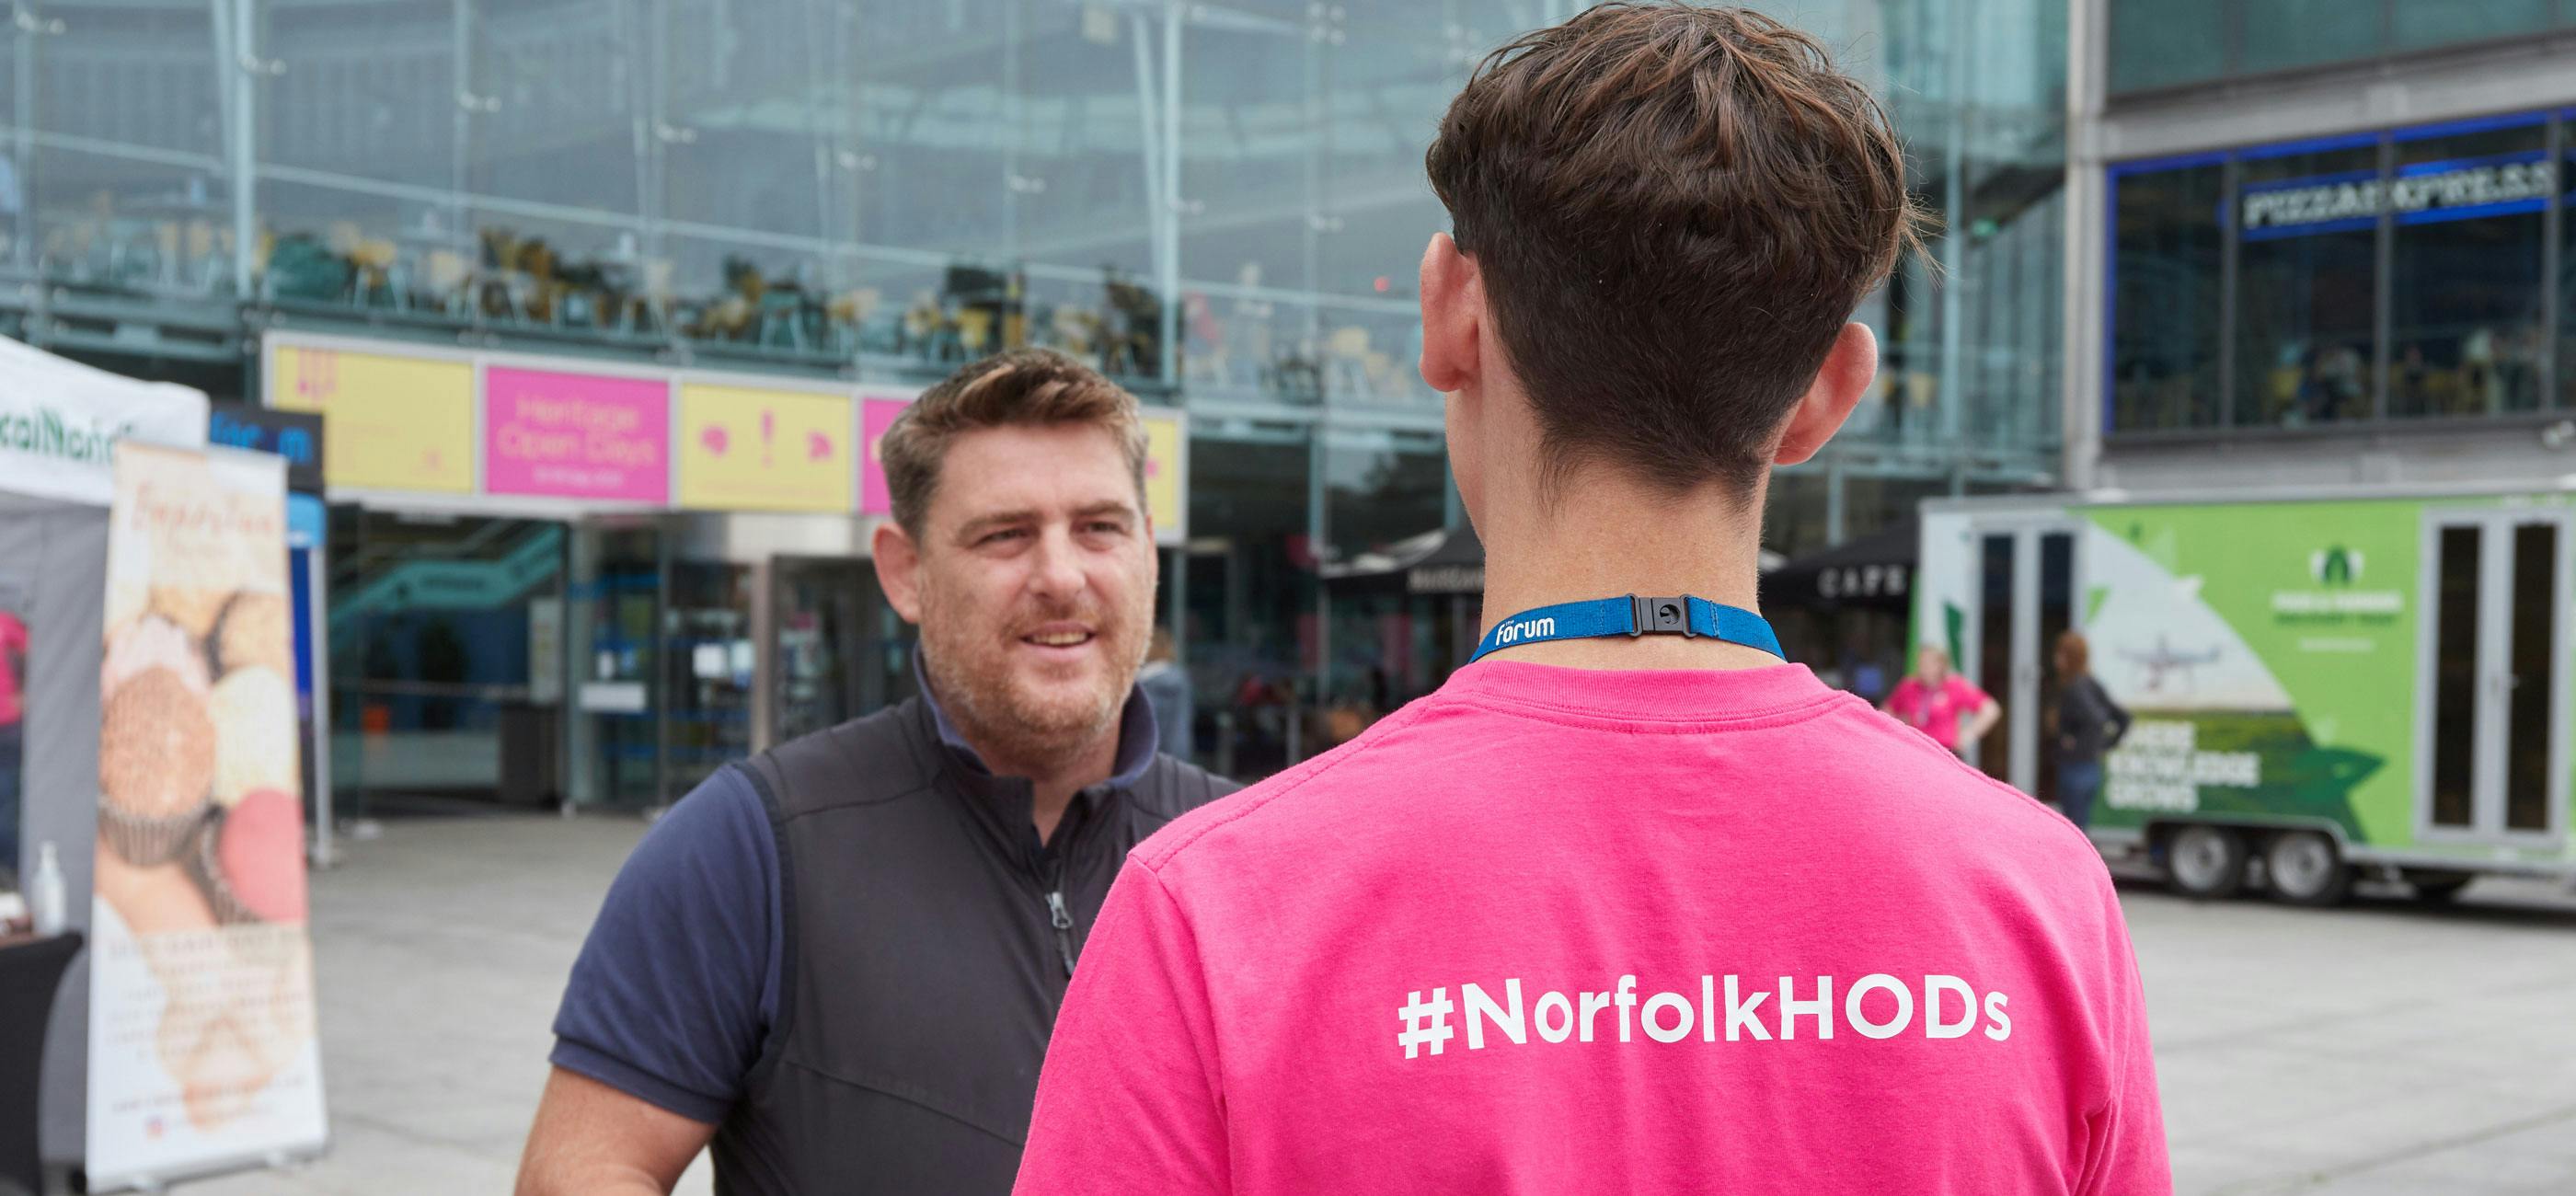 A member of the Norfolk Heritage Open Days team talks to an event organiser wearing a pink T-shirt with #NorfolkHODs on the back.